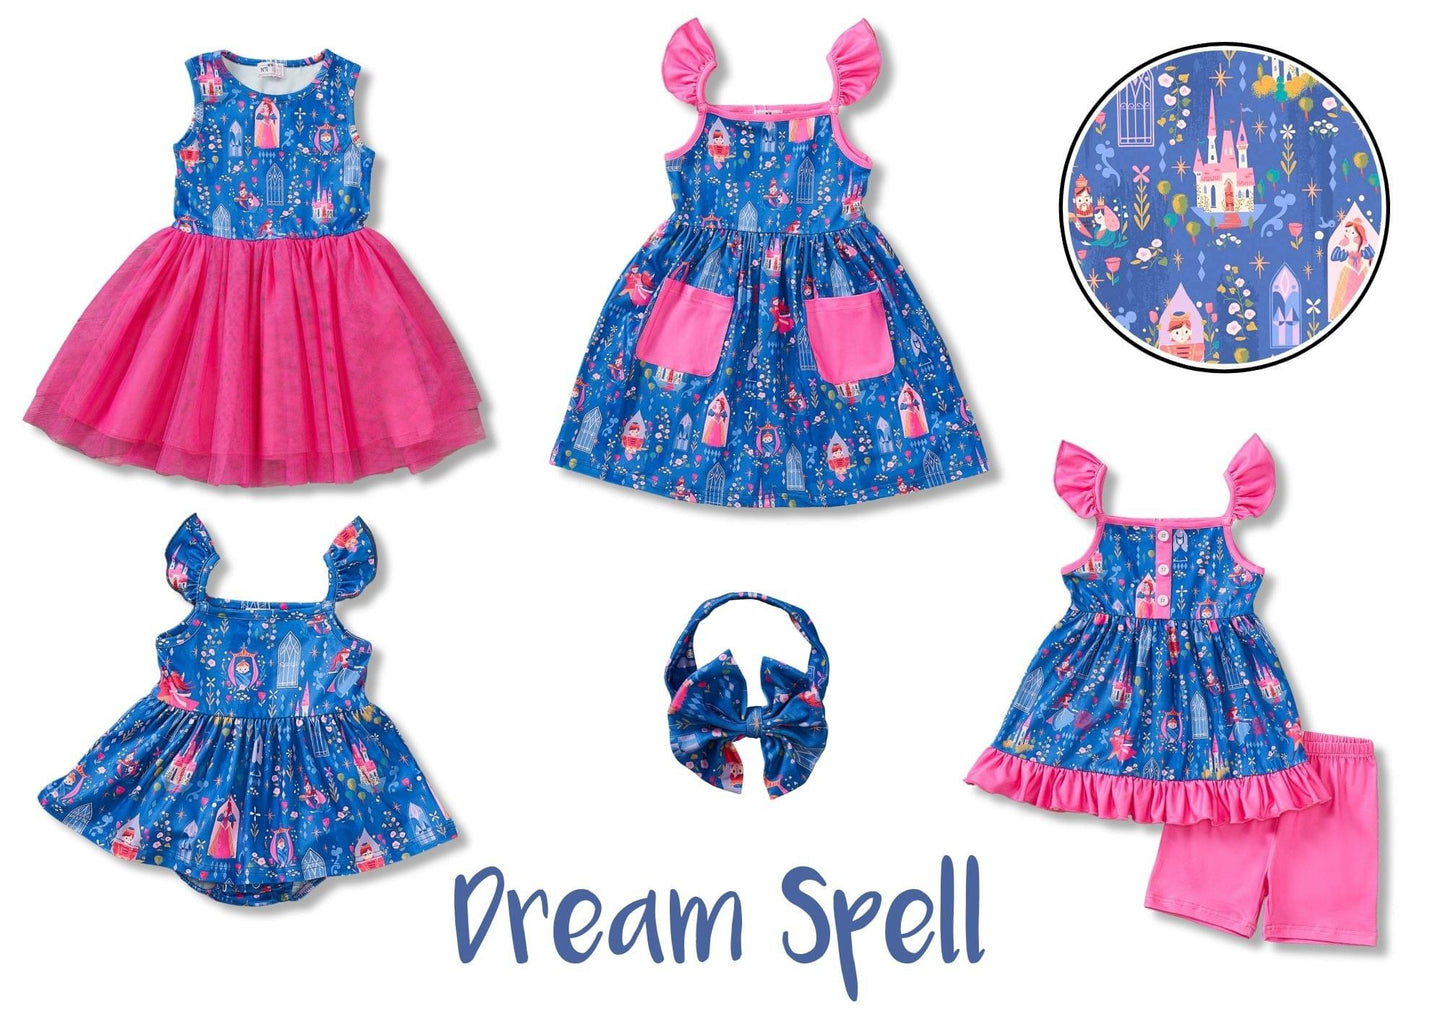 (Preorder) Dream Spell Girl’s Infant Romper by Pete + Lucy